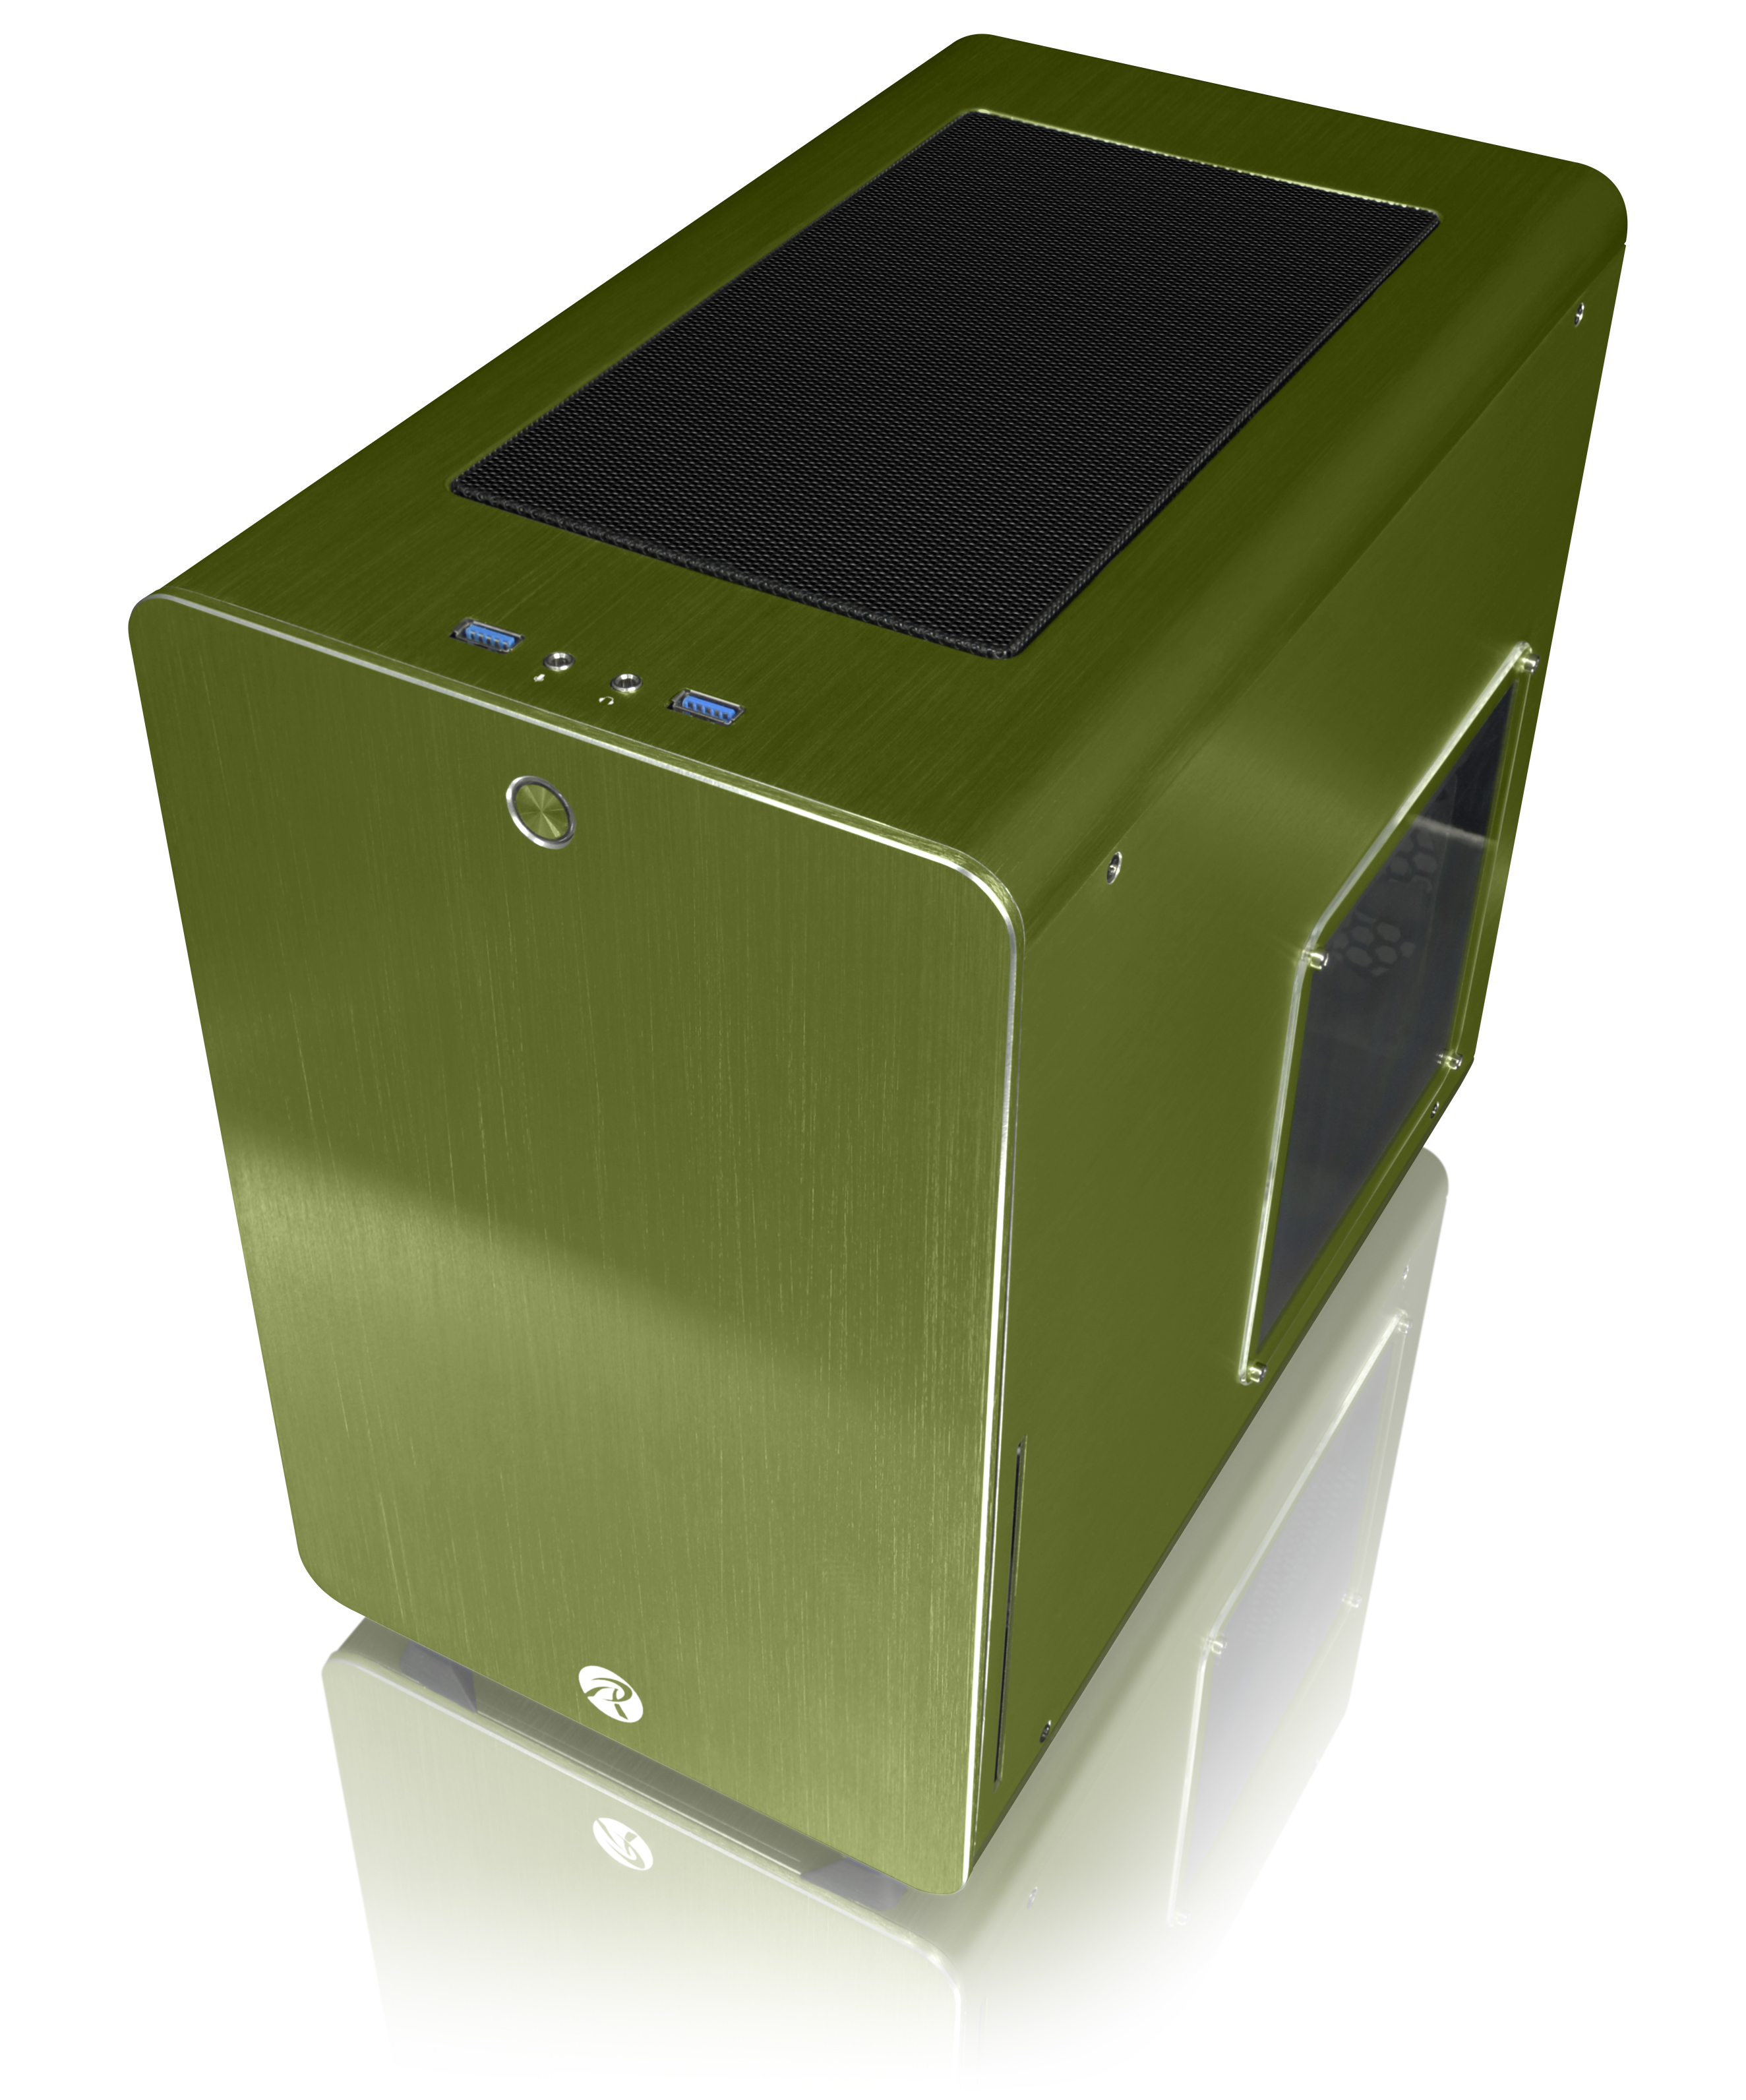 RAIJINTEK STYX GREEN, Alu Micro ATX Case, Compatible With Regular ATX Power Supply, Max. 280mm VGA Card, 180mm CPU Cooler, Max. 240mm Radiator Cooling On Top With A Drive Bay For Slim DVD On Side 